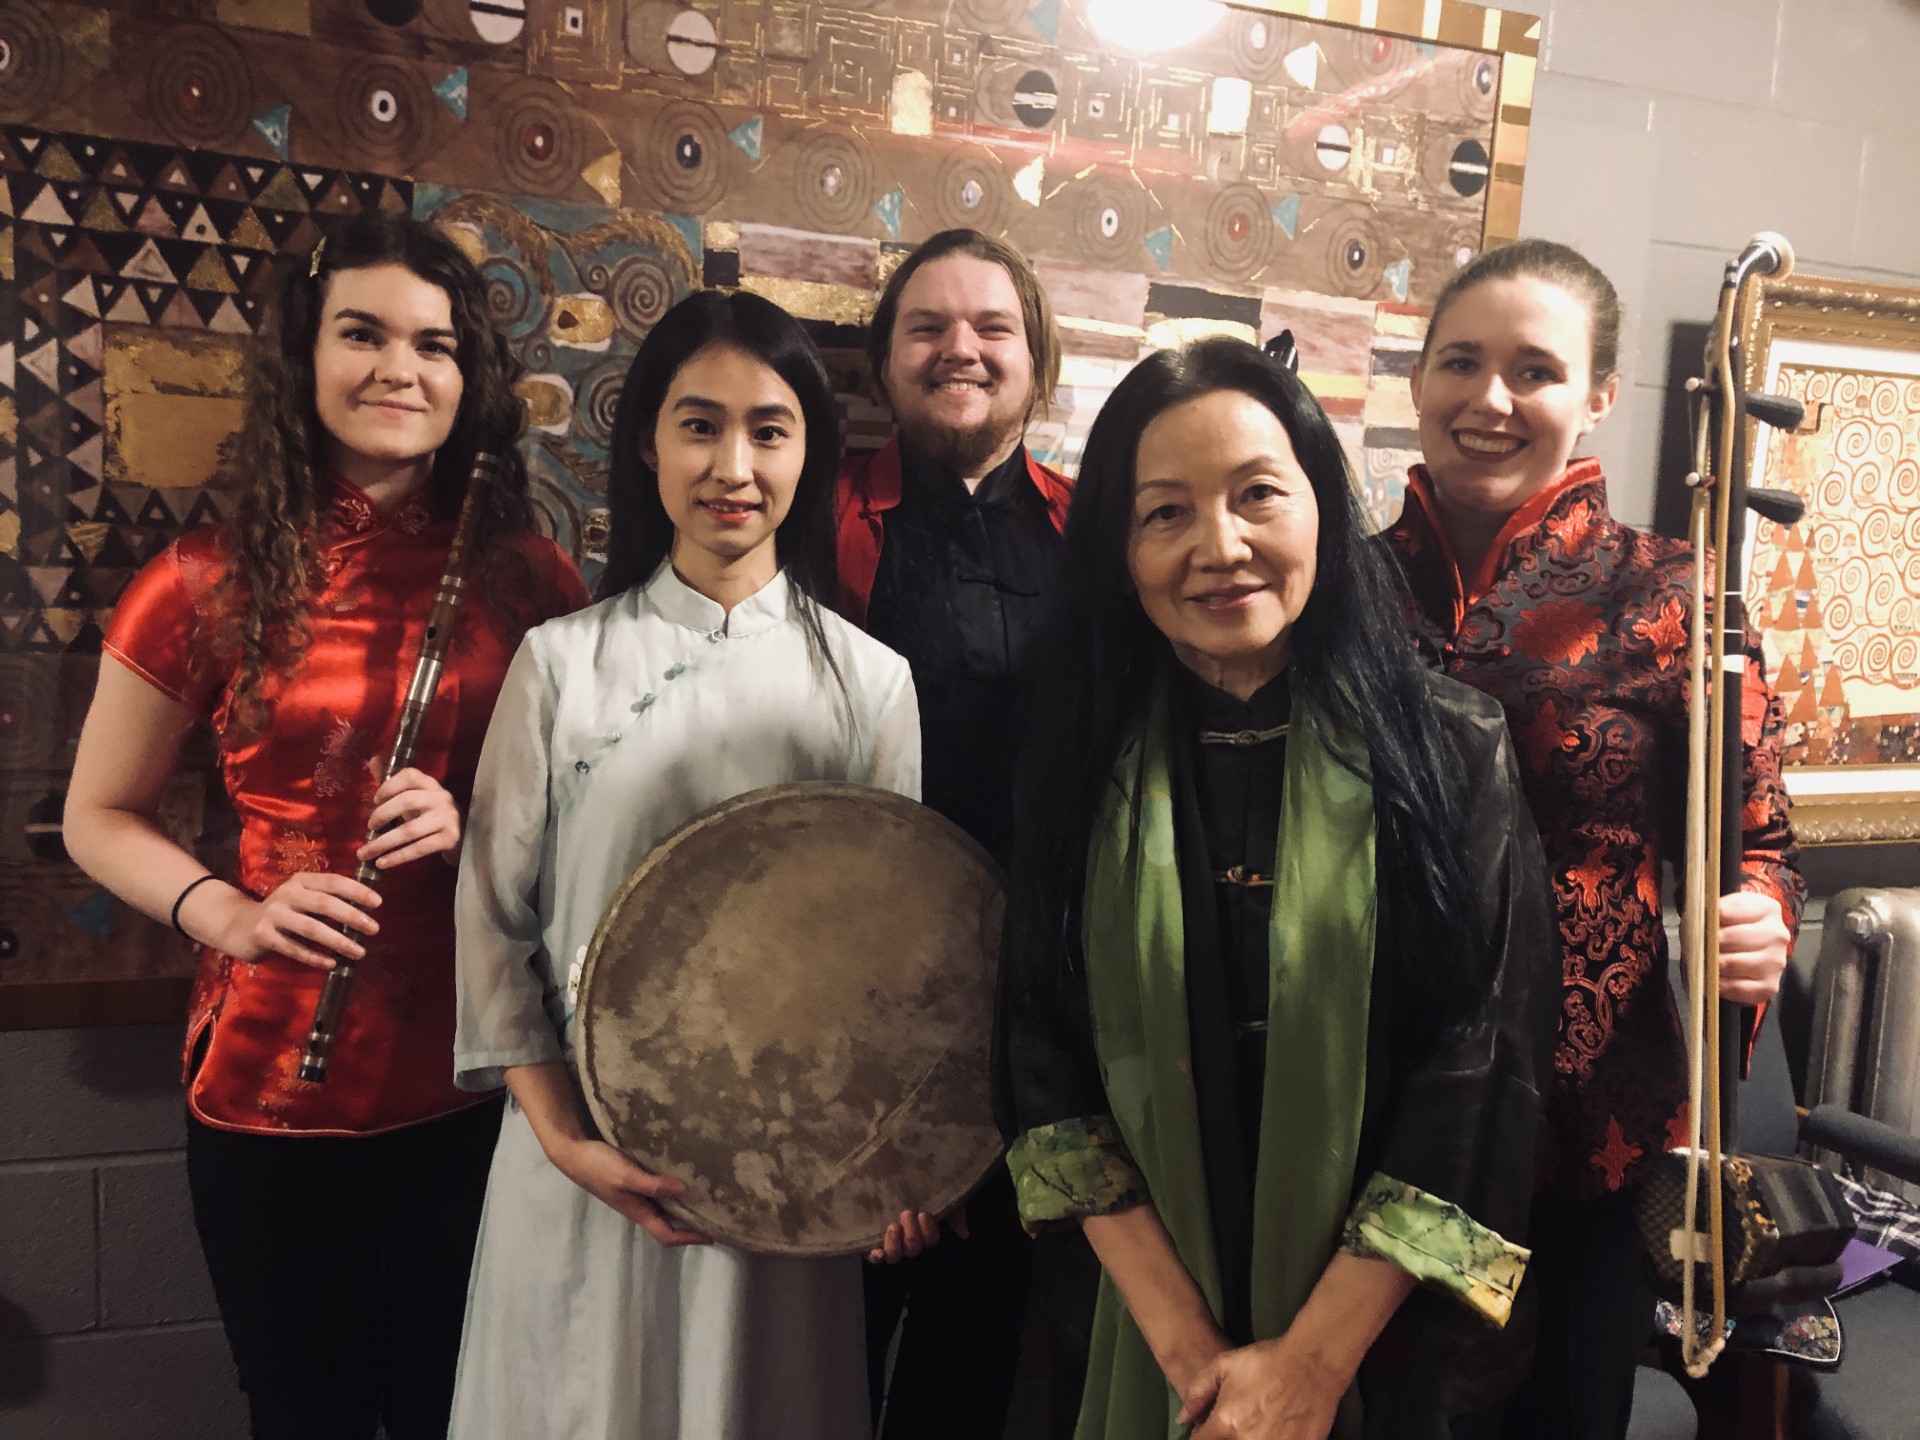 A group picture of the members of the Chinese Ensemble who attended the Darkhorse Concert